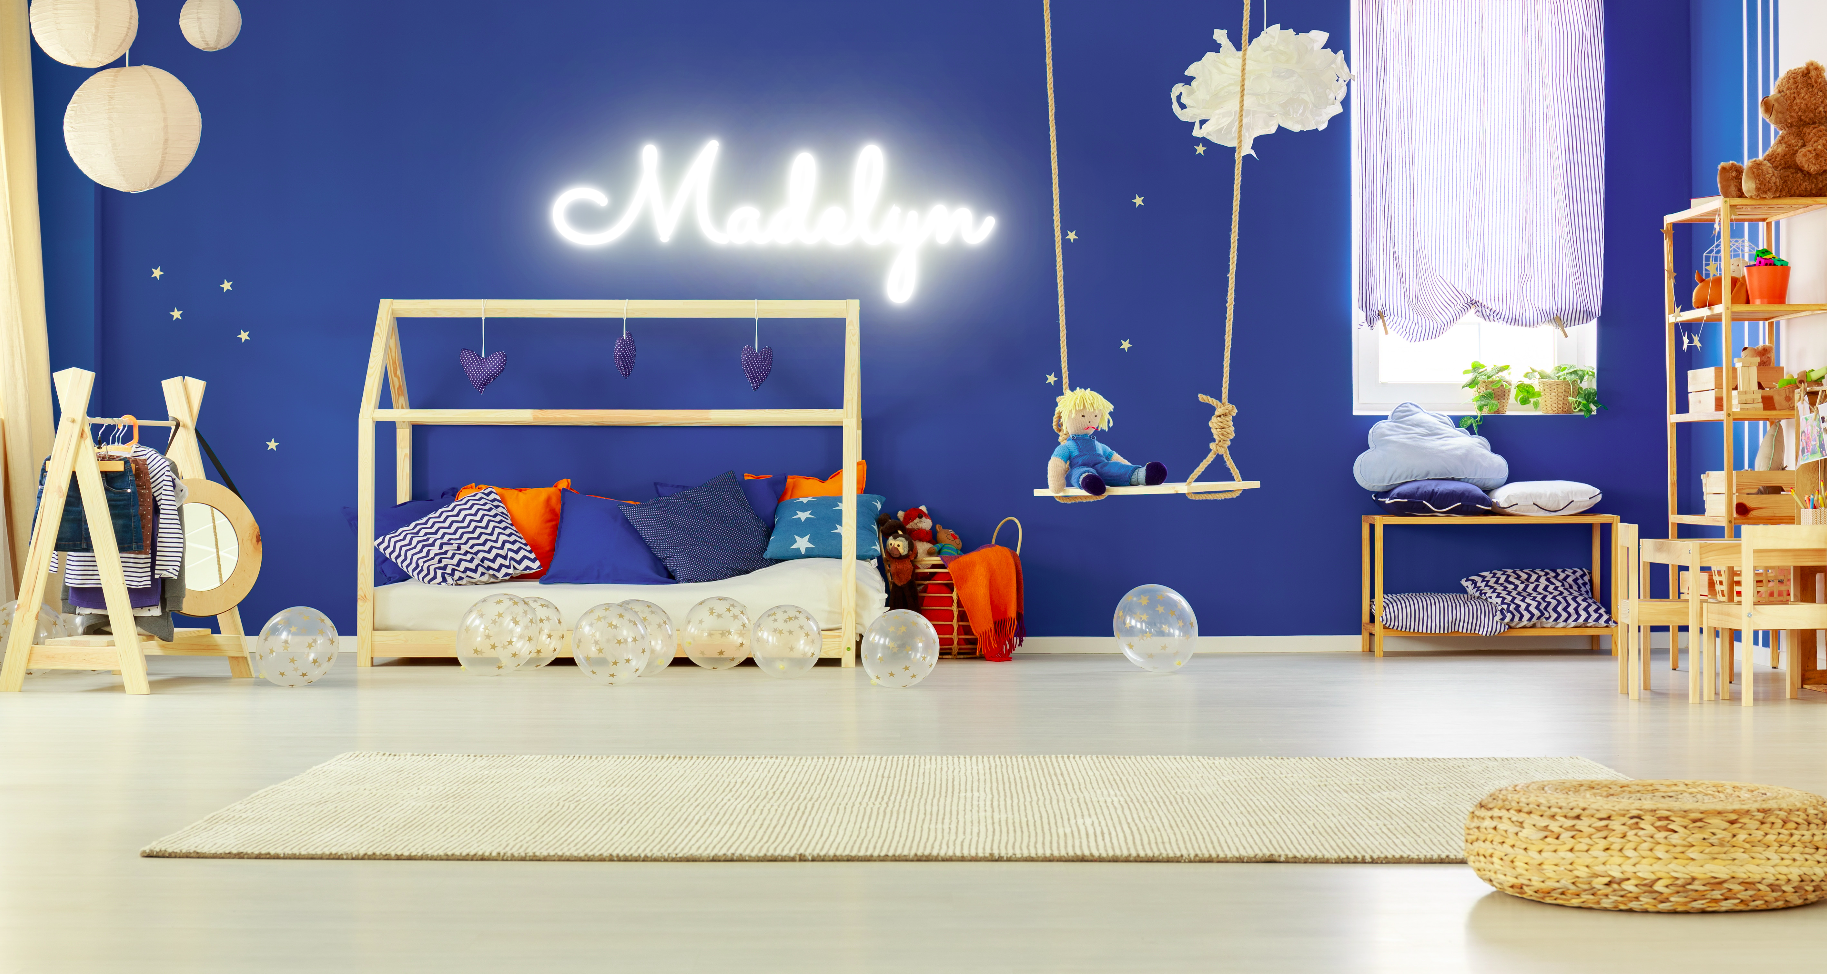 "Madelyn" Baby Name LED Neon Sign